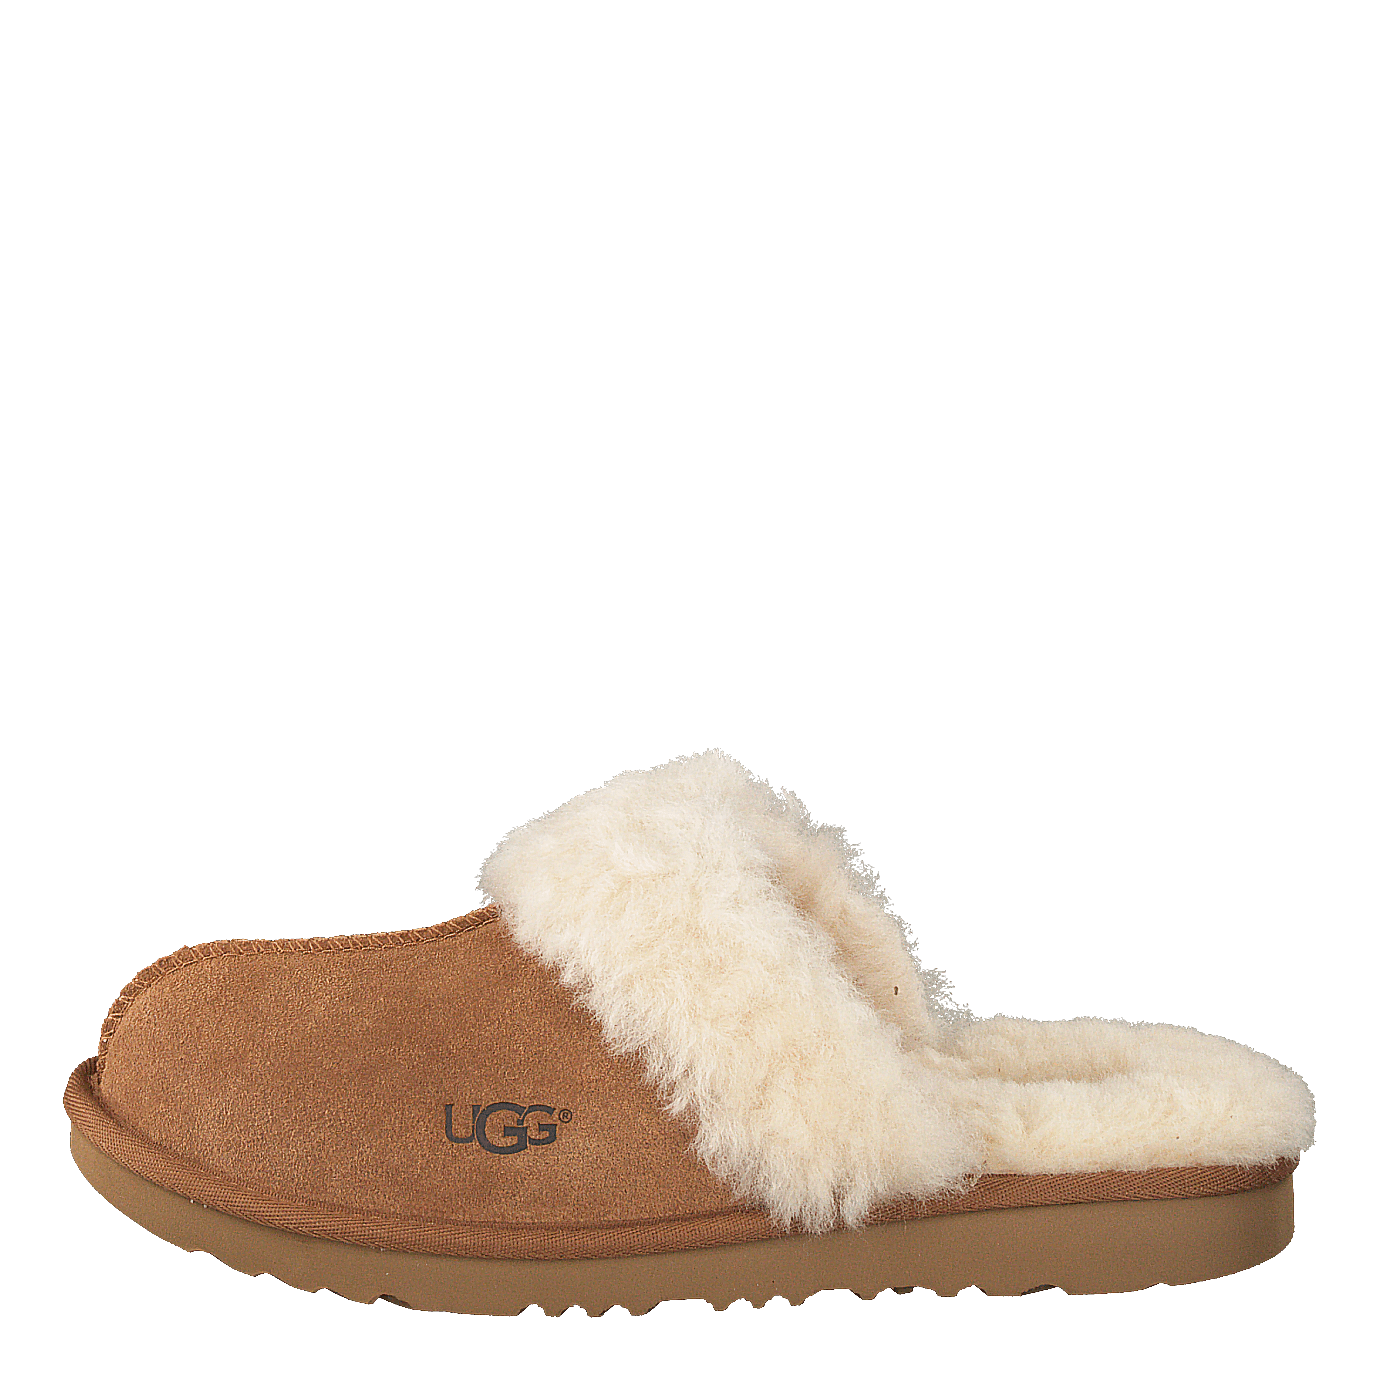 UGG Cozy Slippers for Women $69.99 Shipped